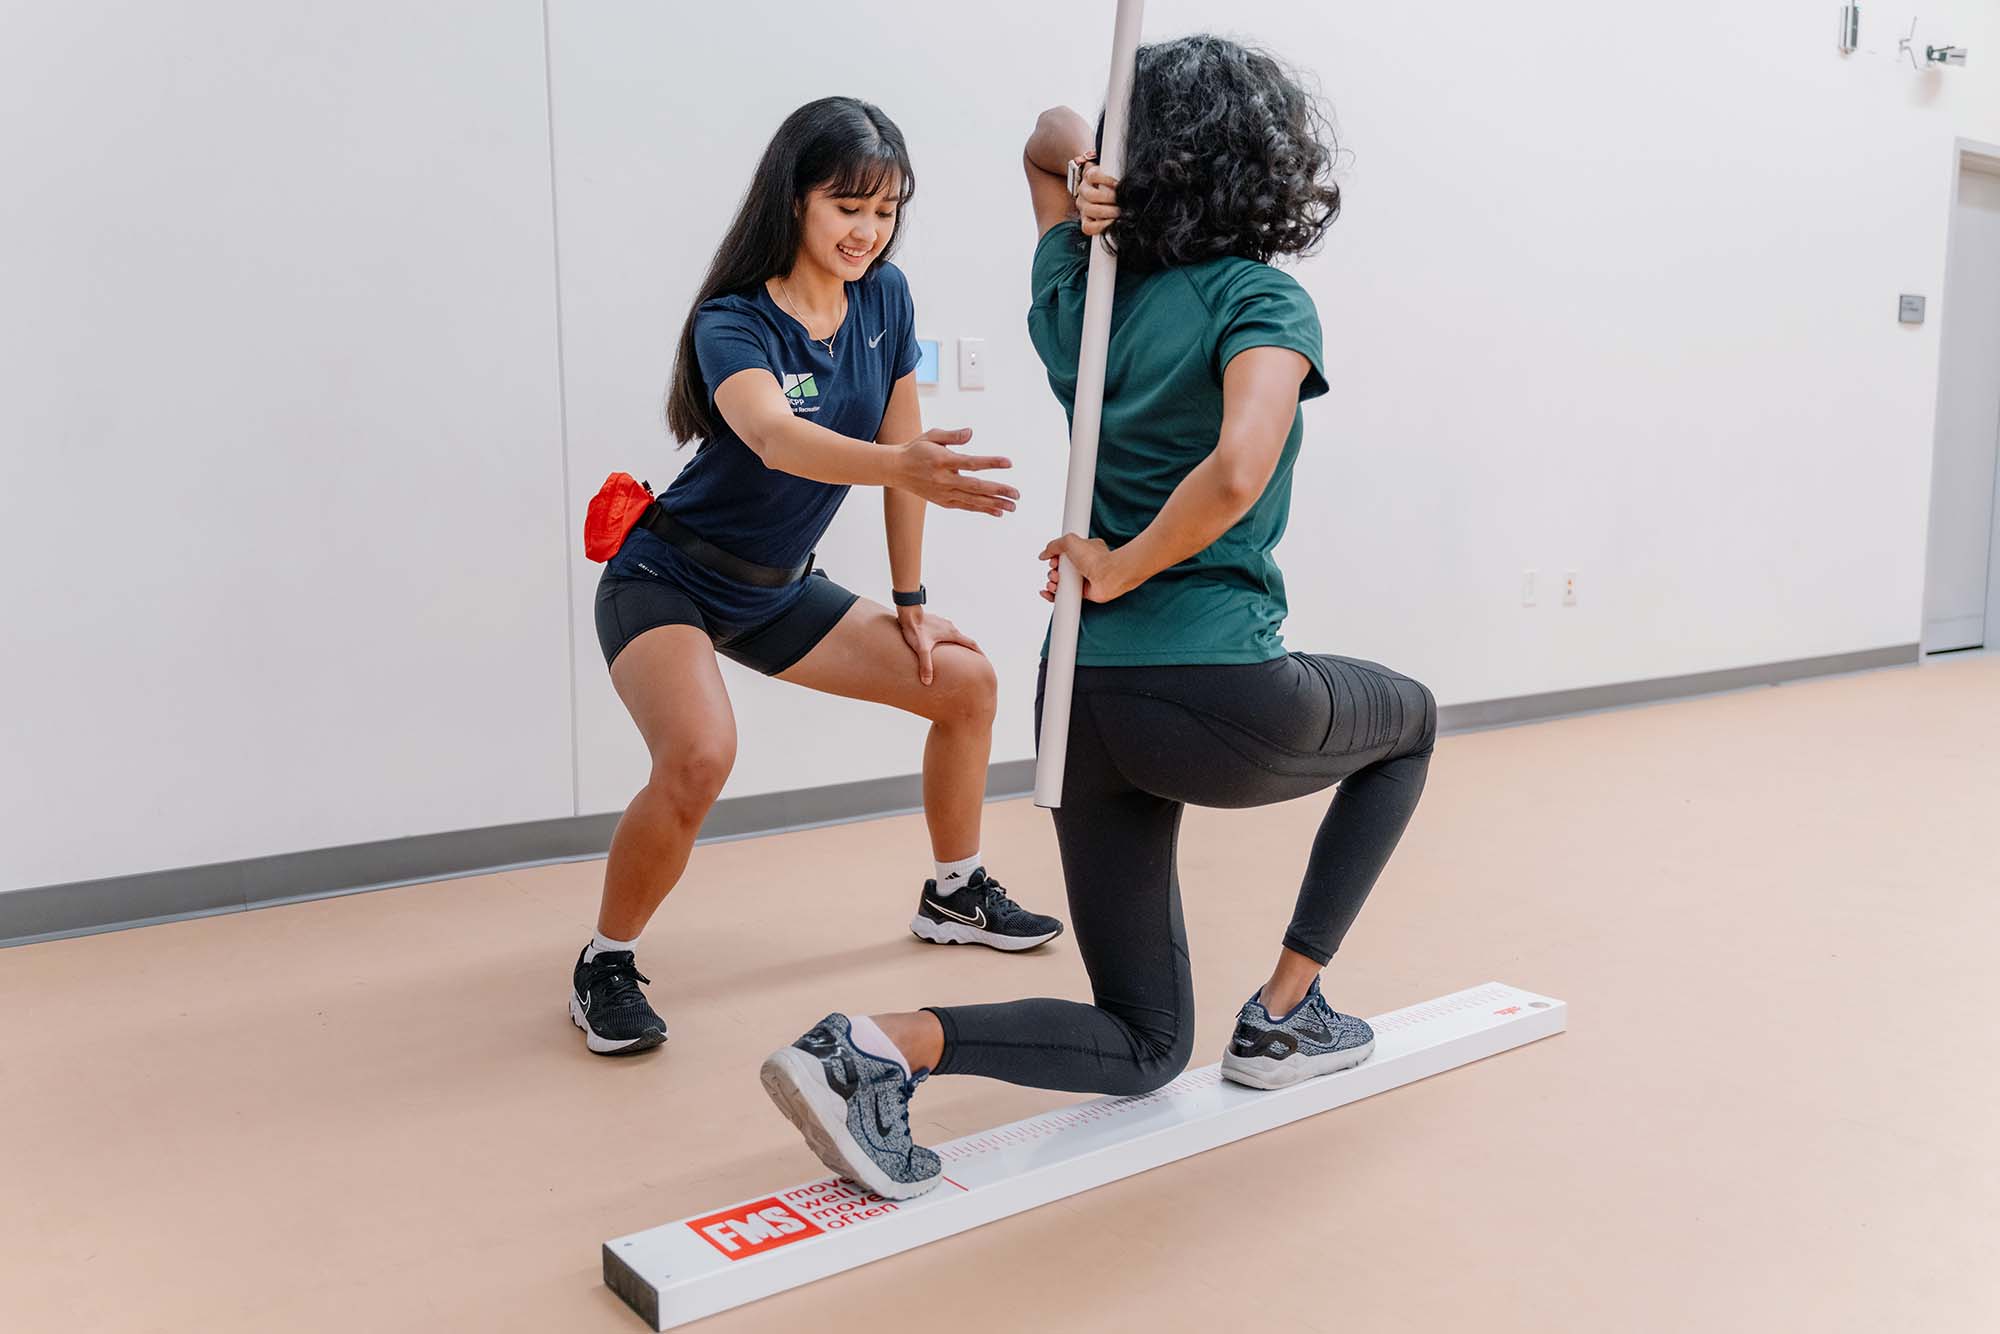 Personal trainer assisting a student with balance exercises